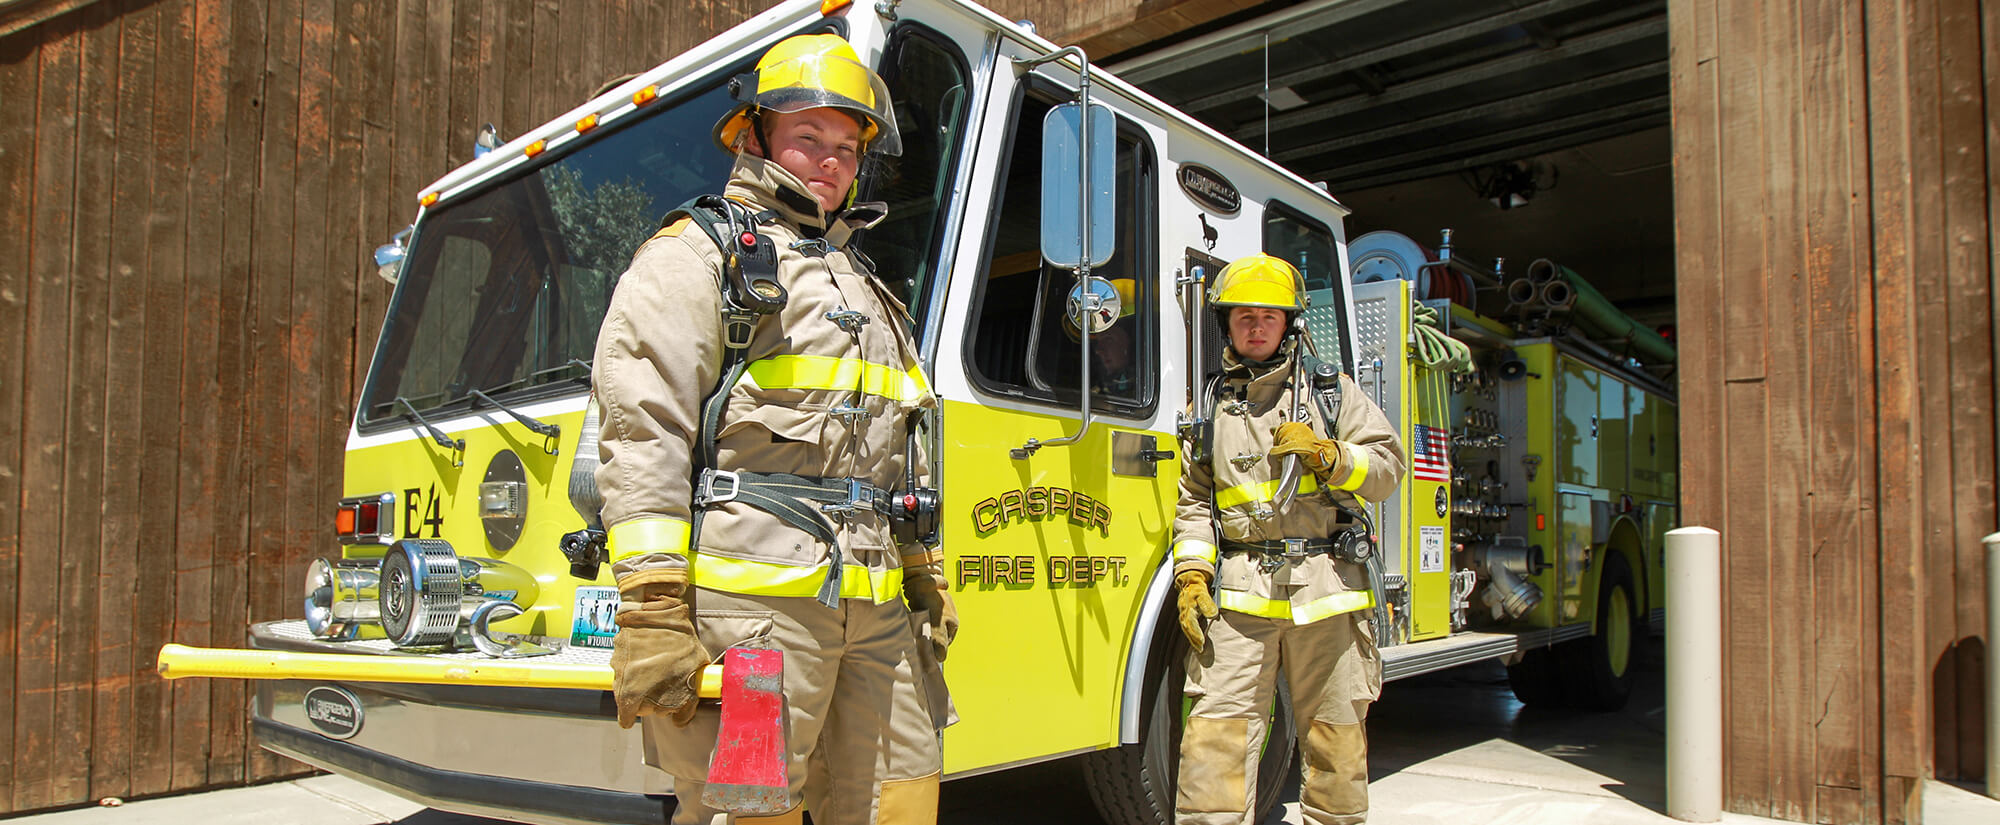 Photo of two students in firefighter gear standing in front of a fire truck at Casper College.